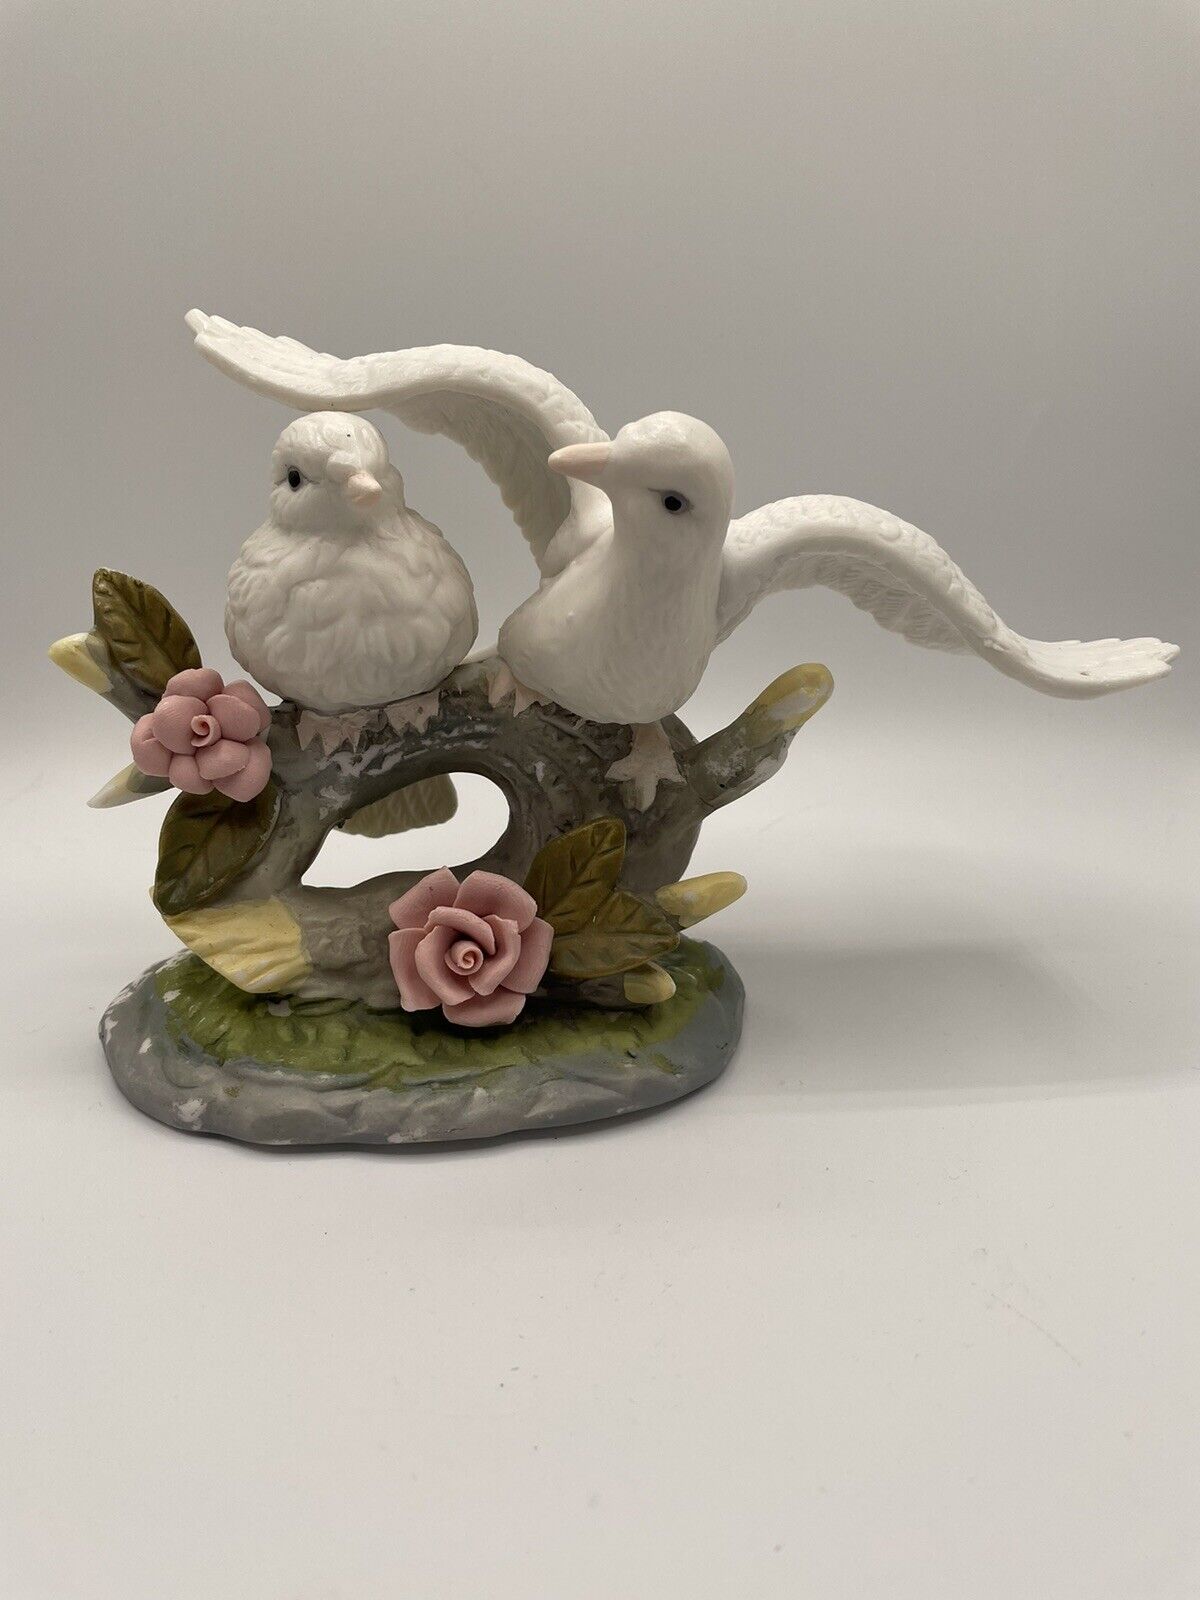 Wellington Accents White Love Doves Perched on Branch 8x6x3.5”